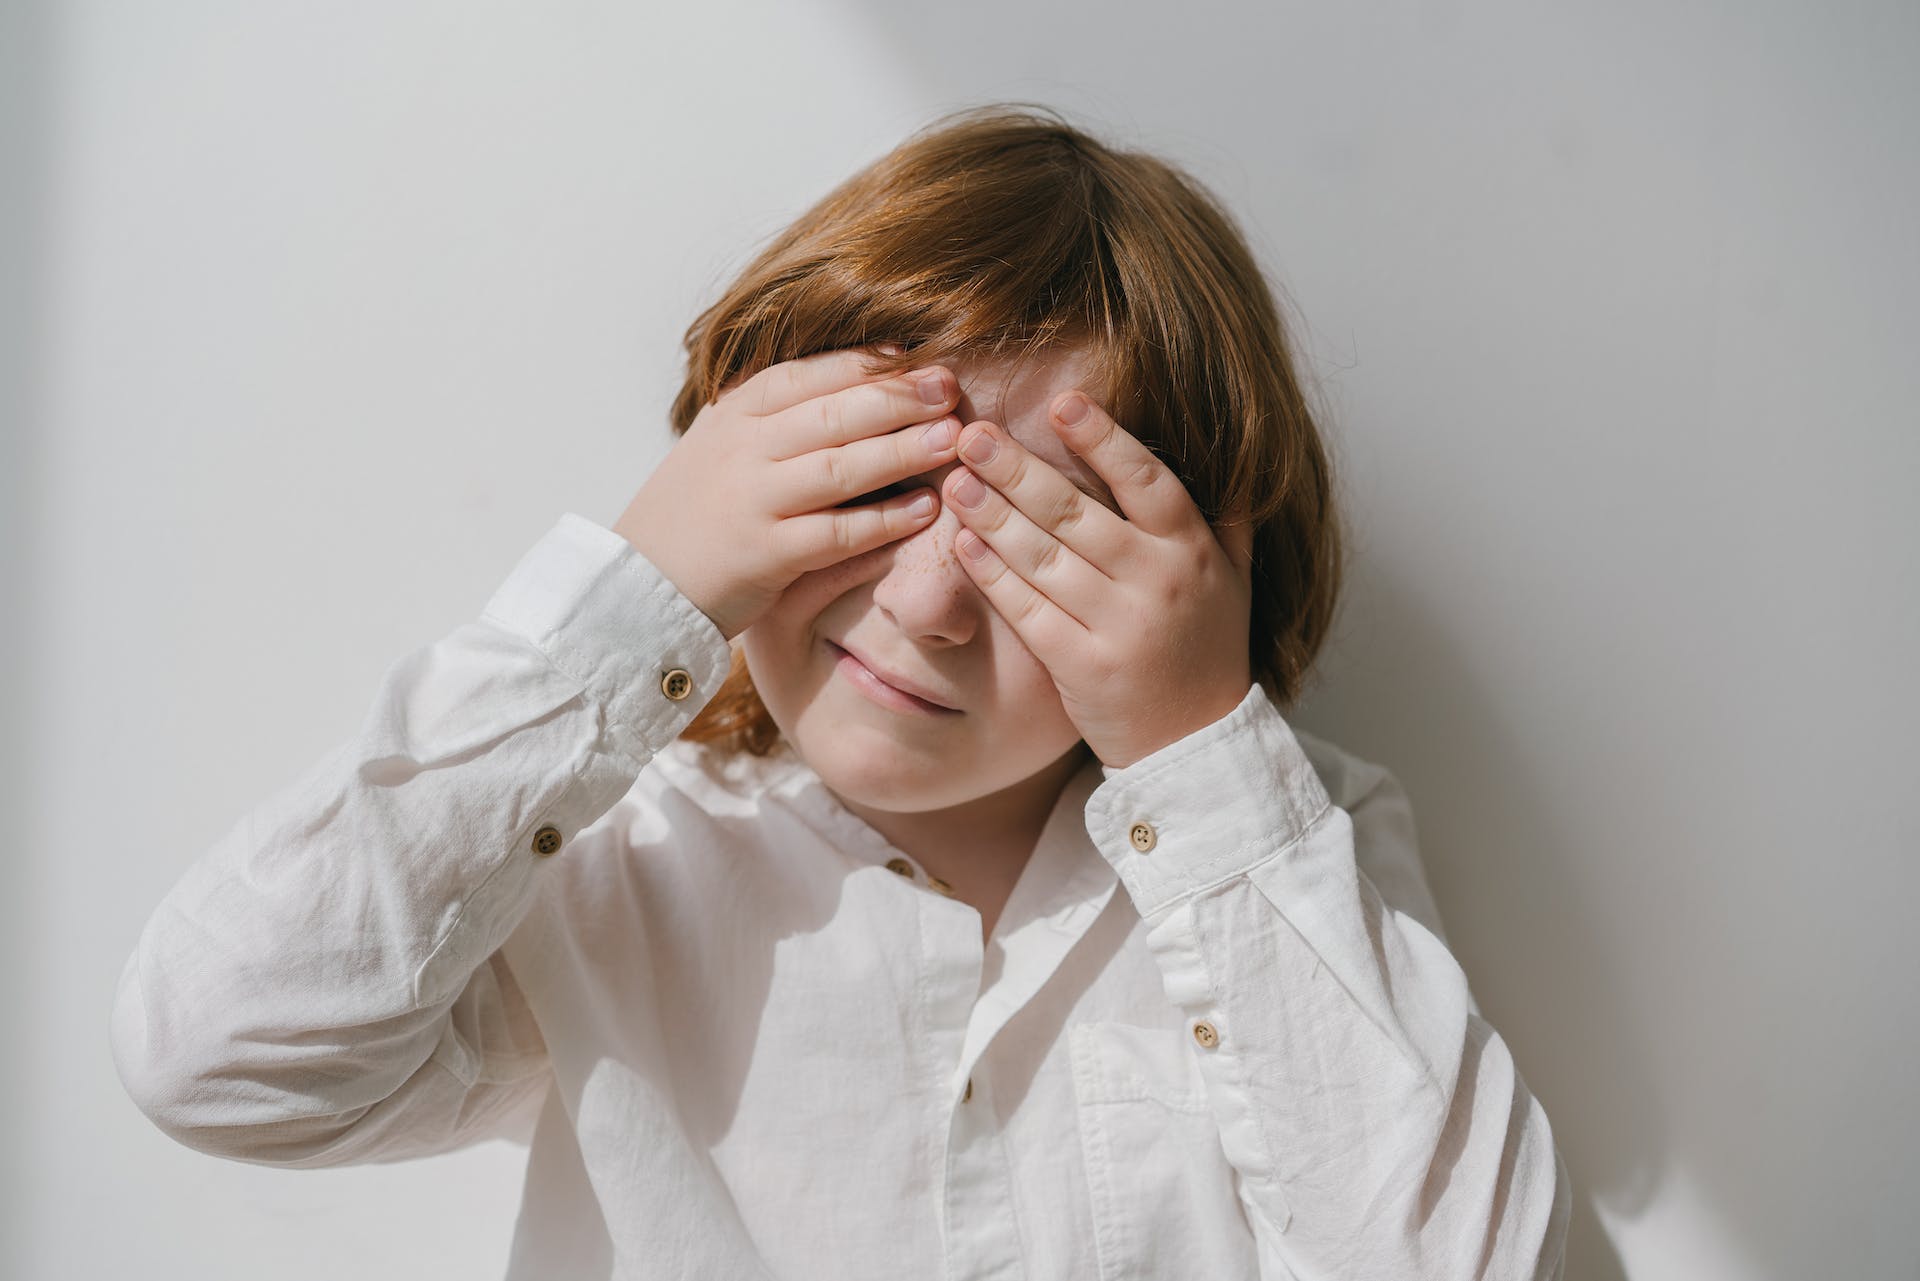 Boy covering his face | Source: Pexels